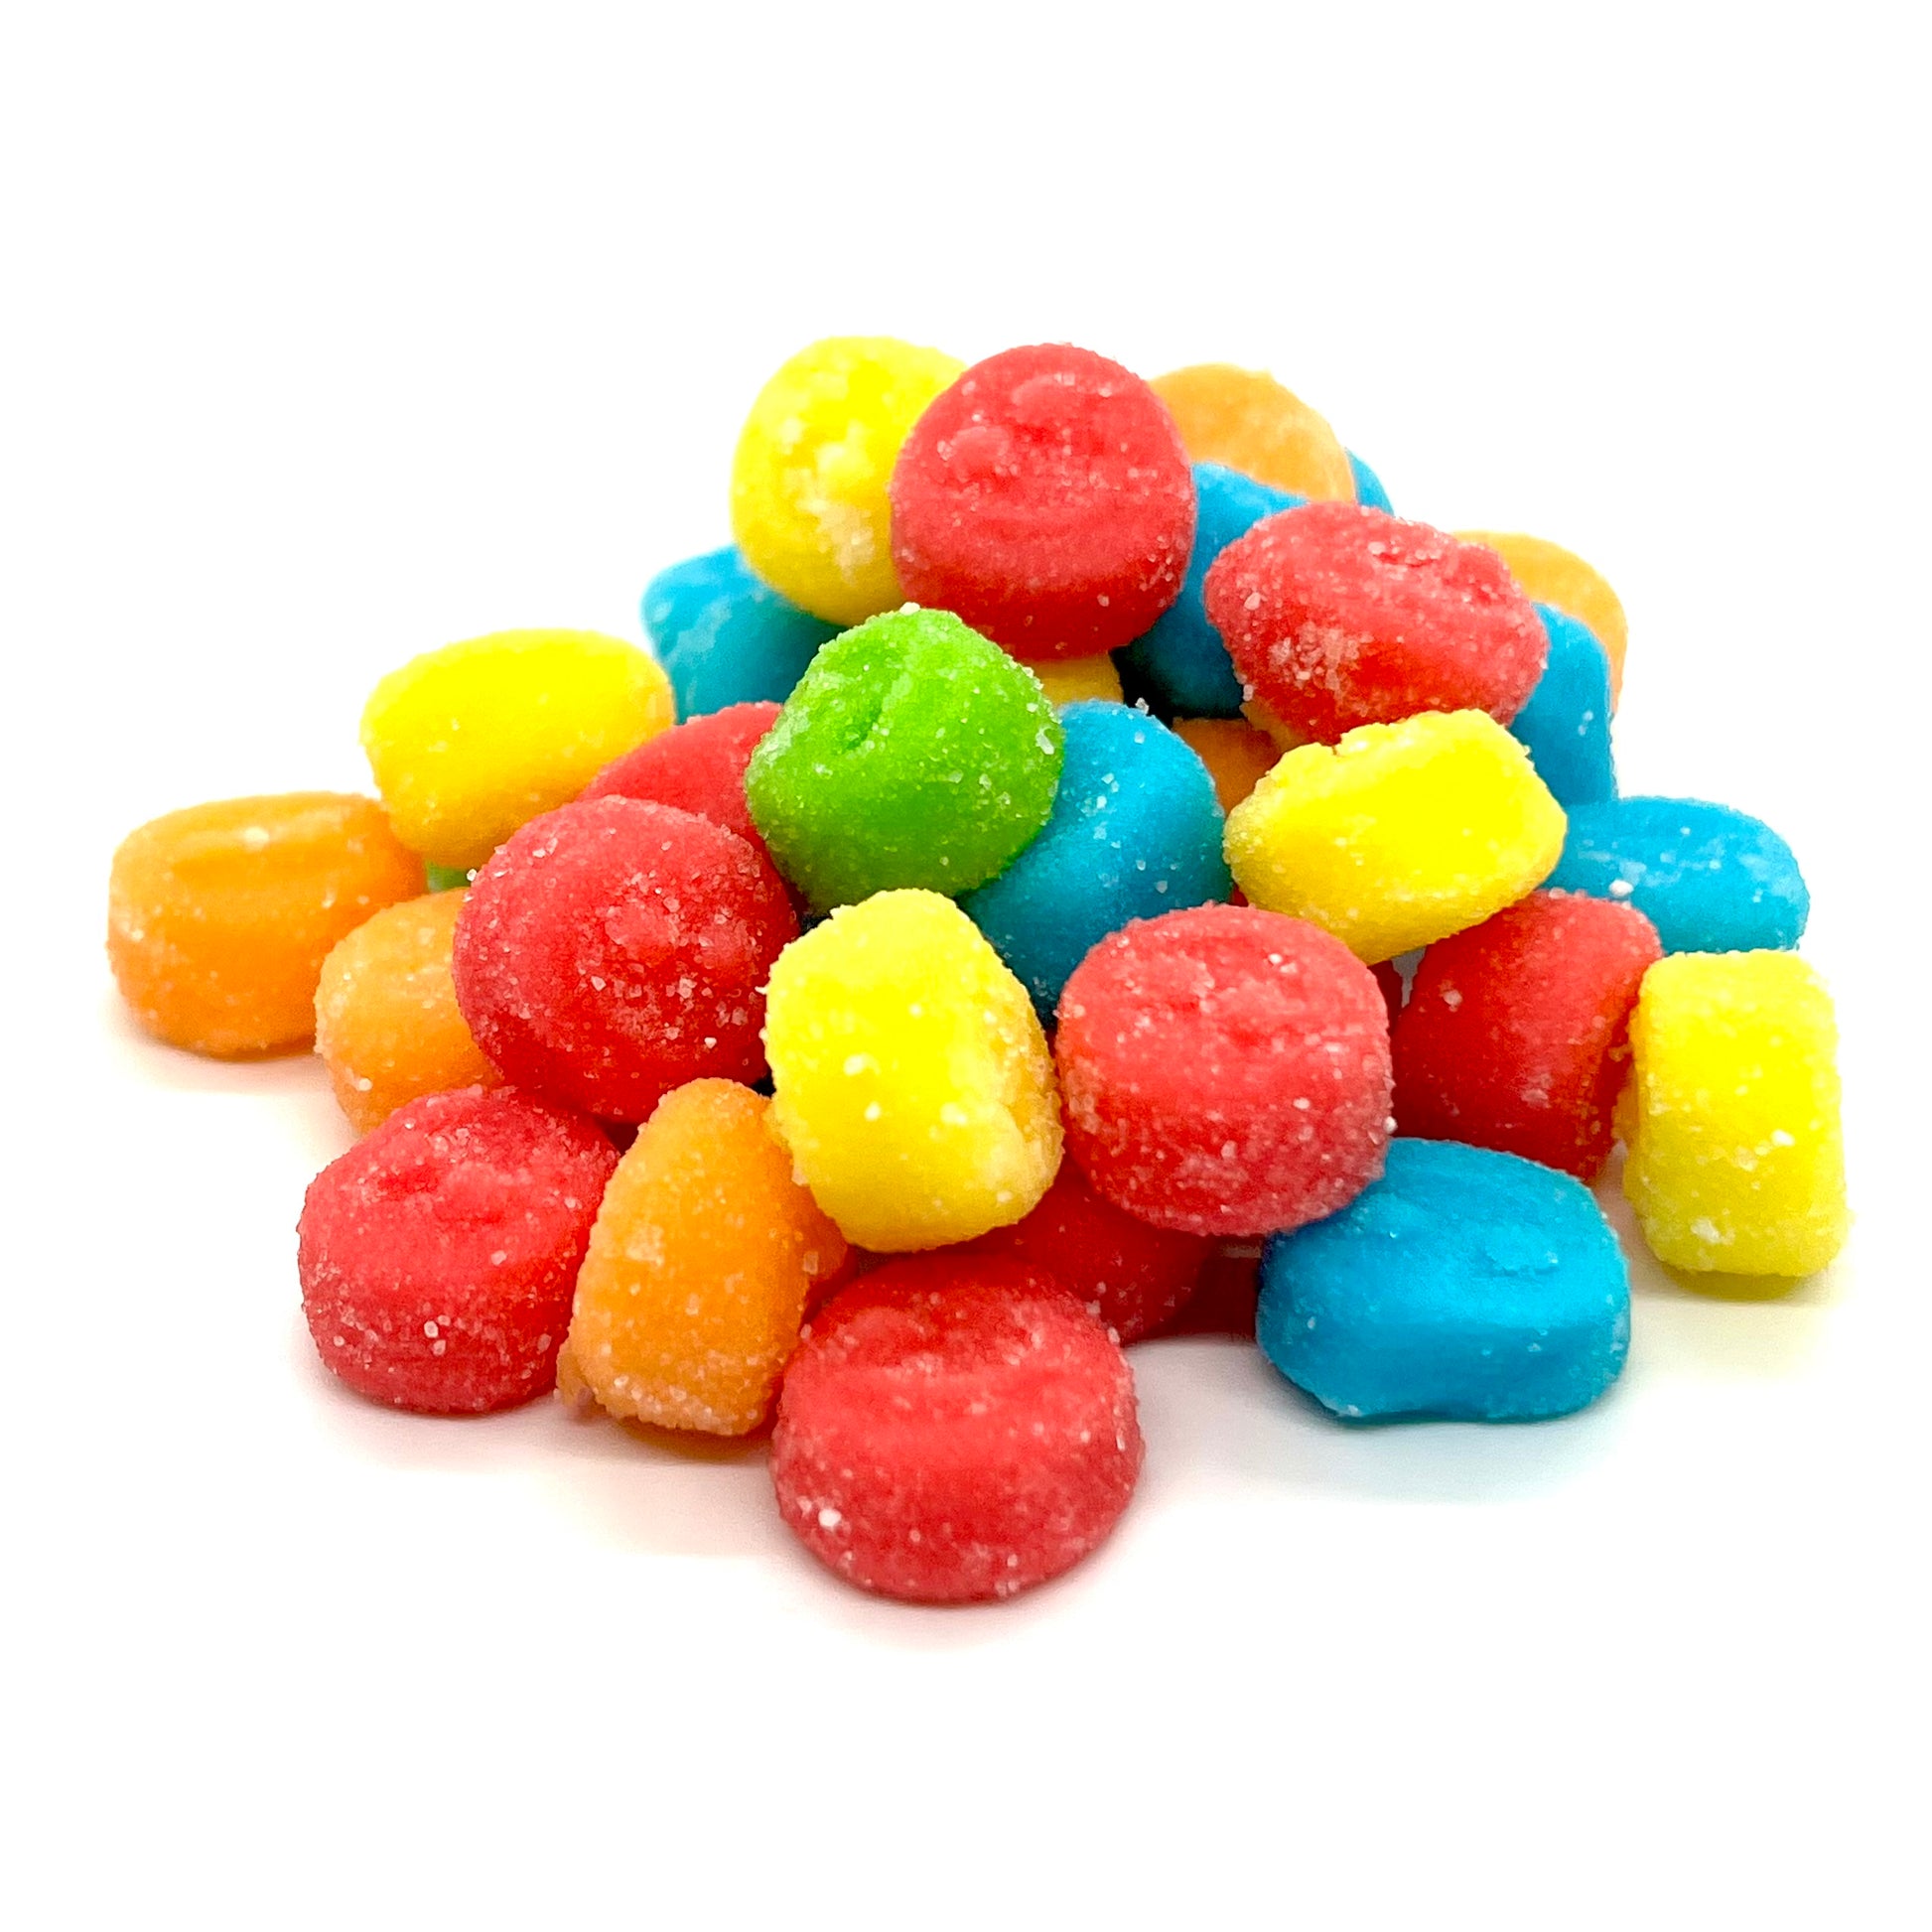 NEW) Sour Gummy Poppers - Wholesale Unlimited Inc.